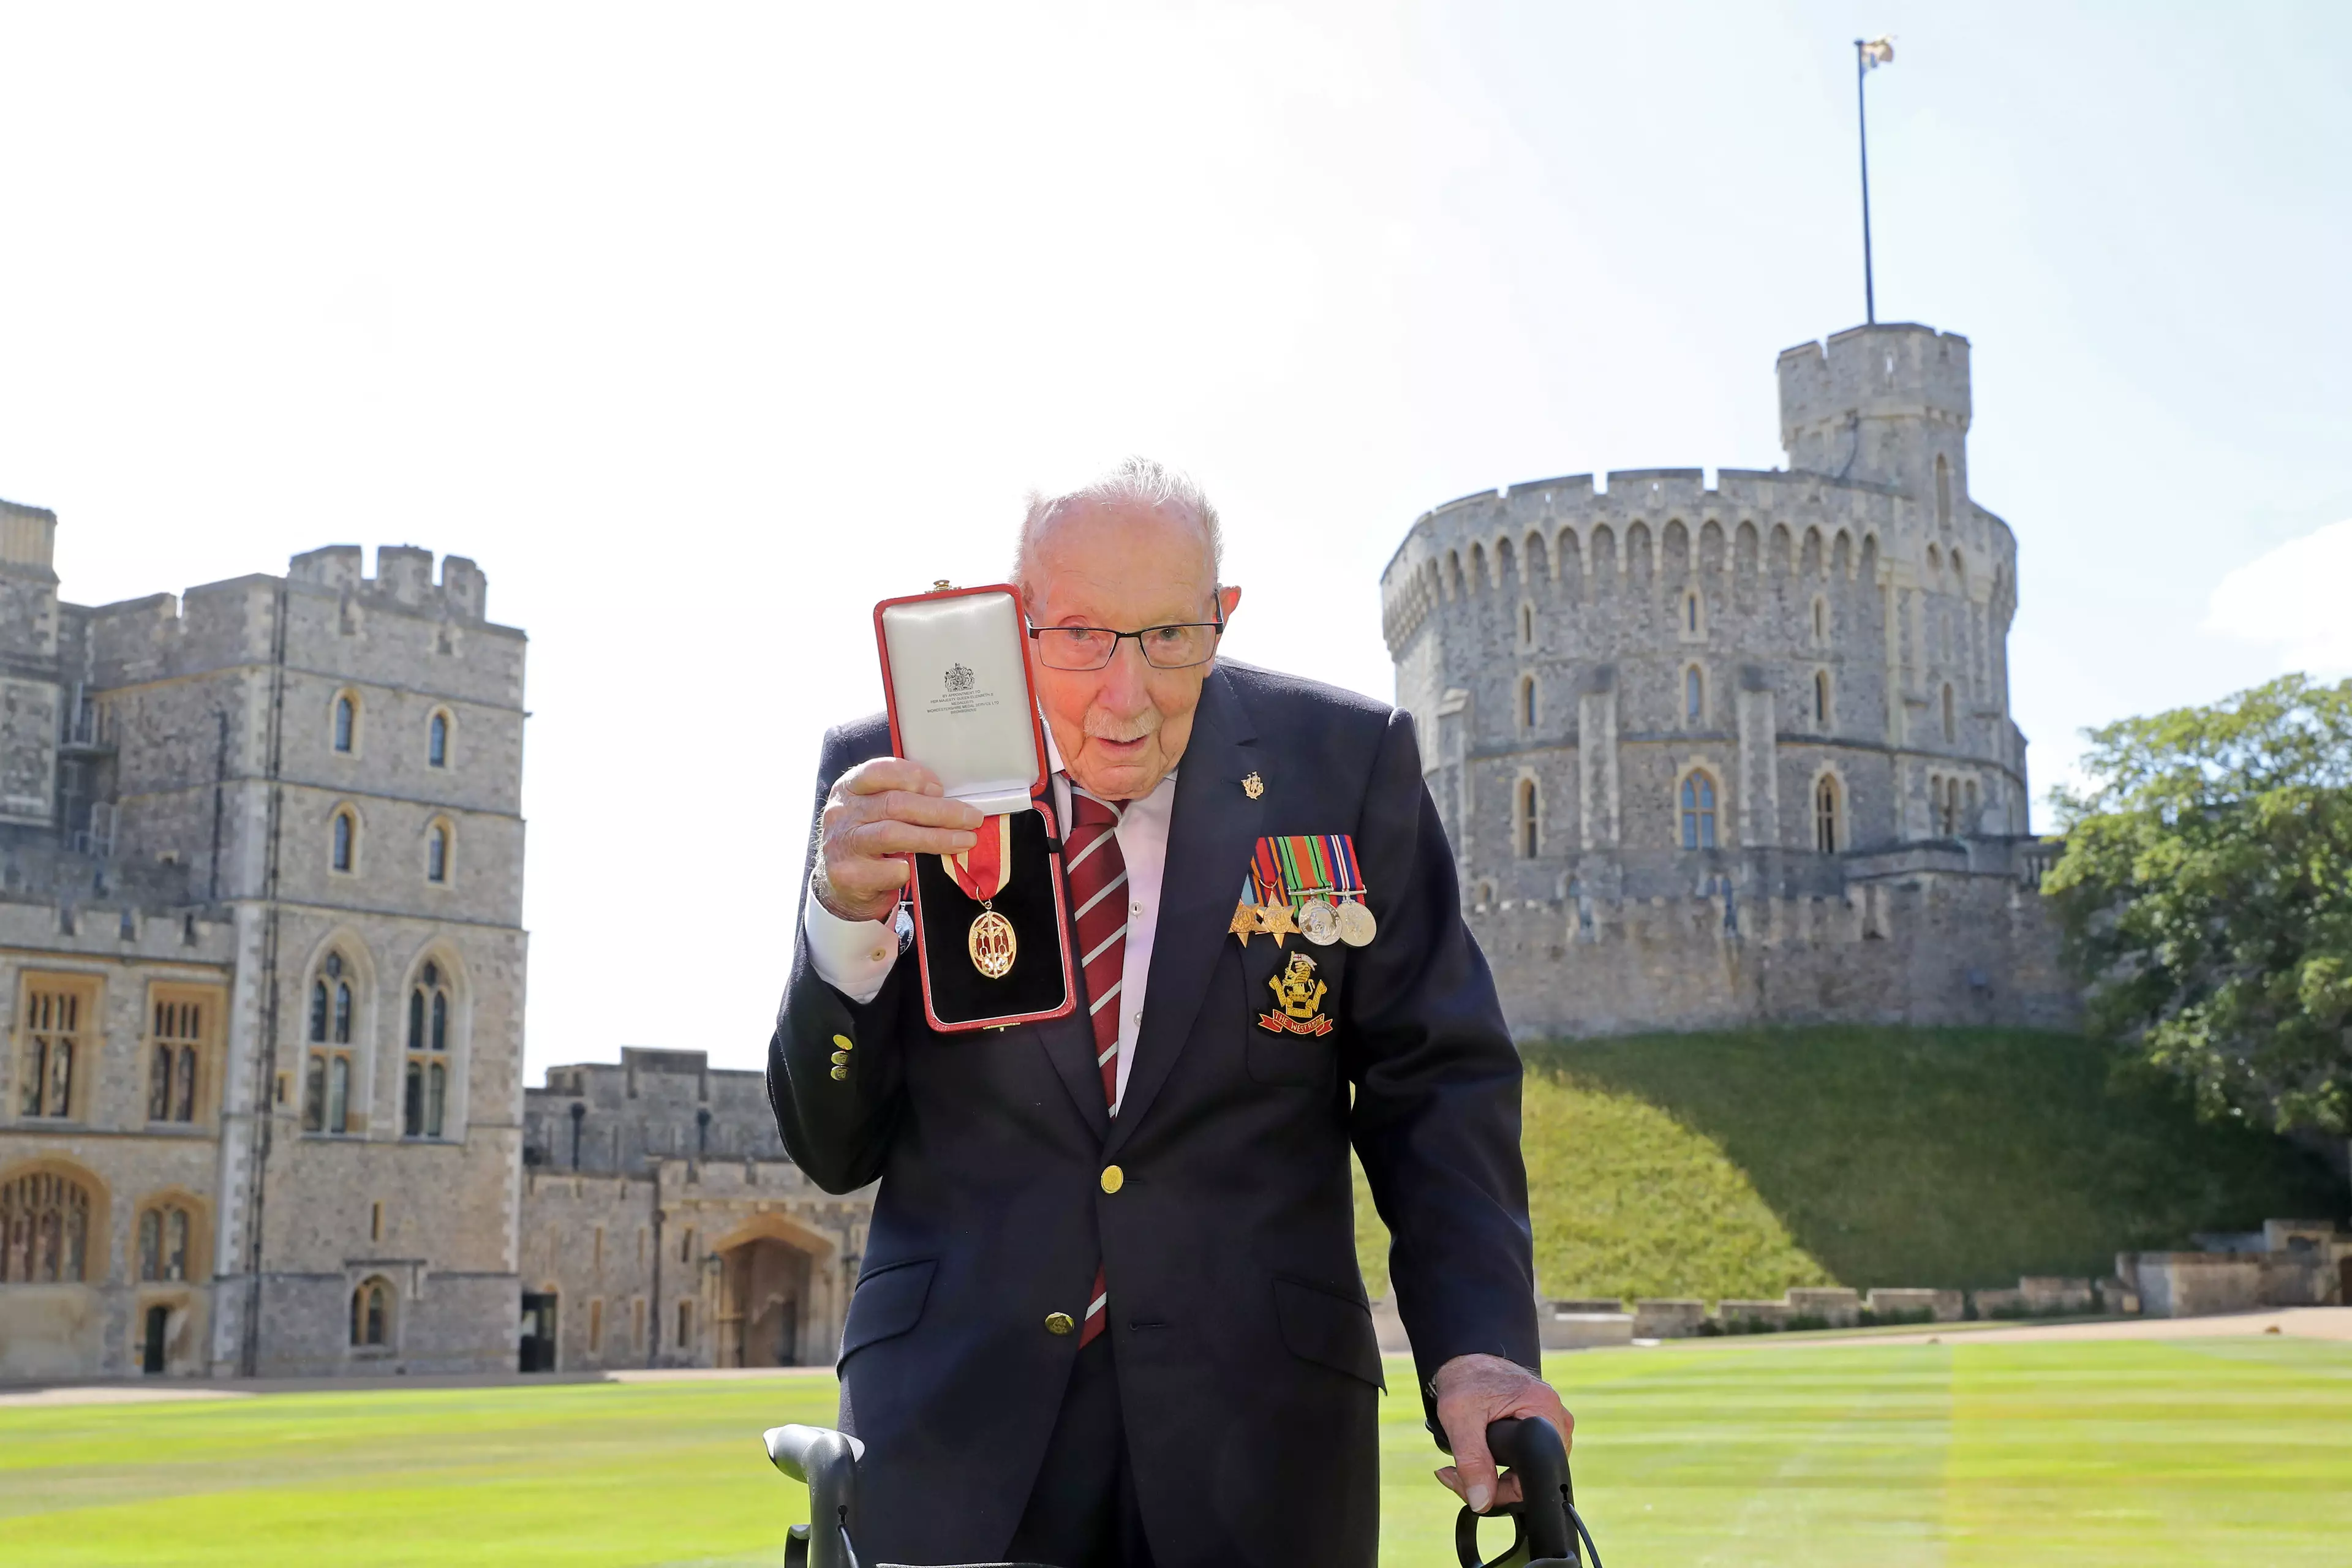 Captain Sir Tom Moore raised £32.8 million for the NHS.